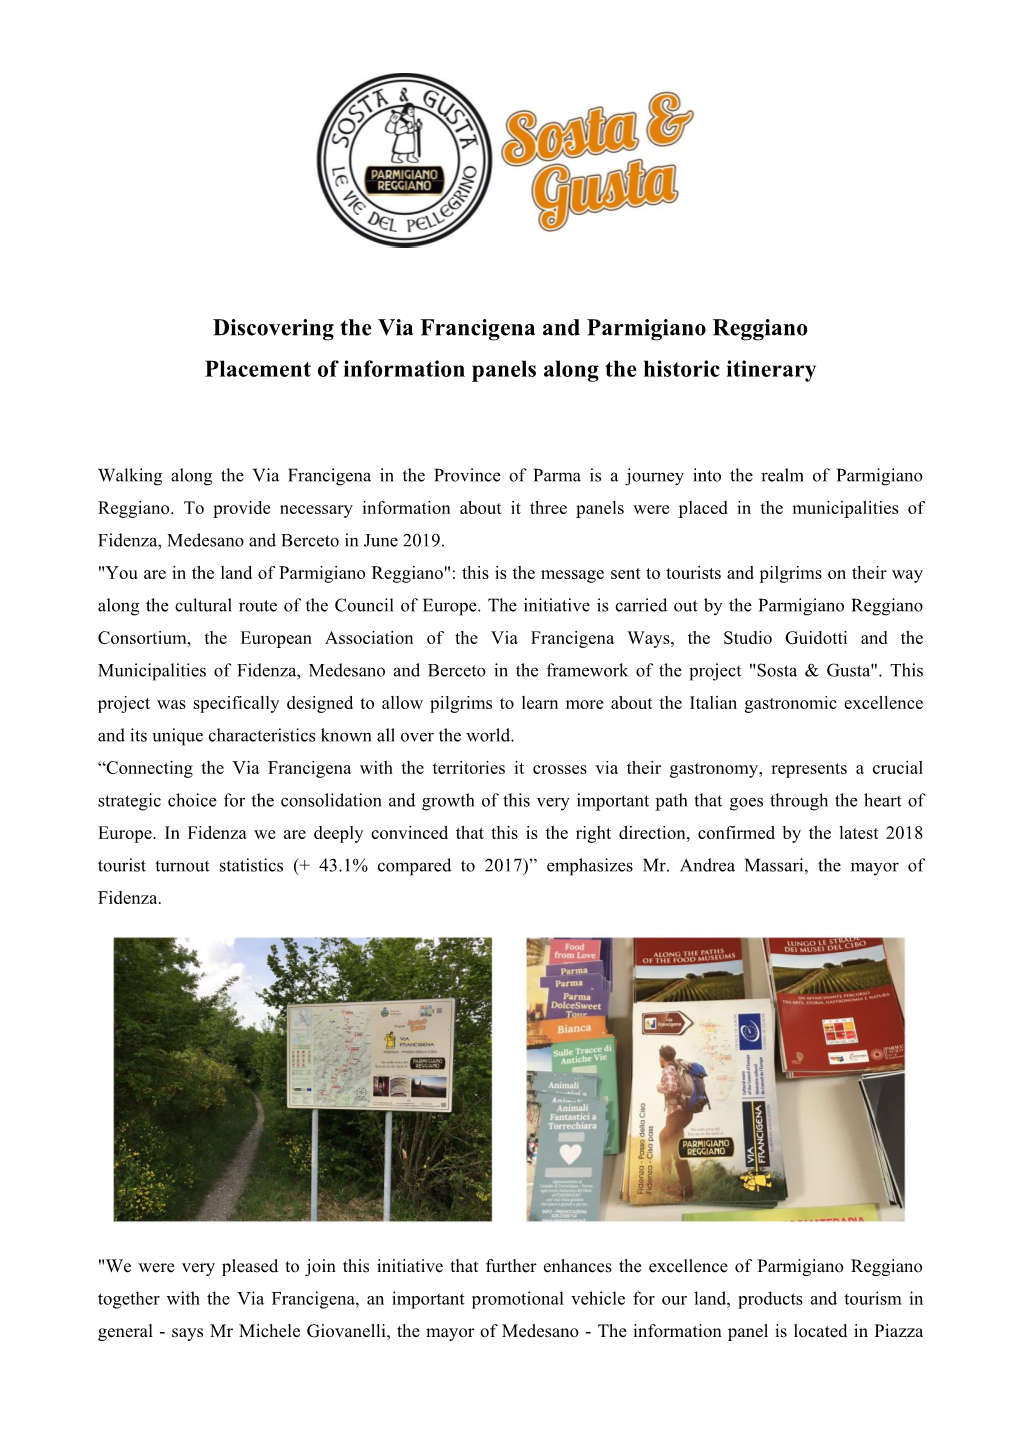 Discovering the Via Francigena and Parmigiano Reggiano Placement of Information Panels Along the Historic Itinerary